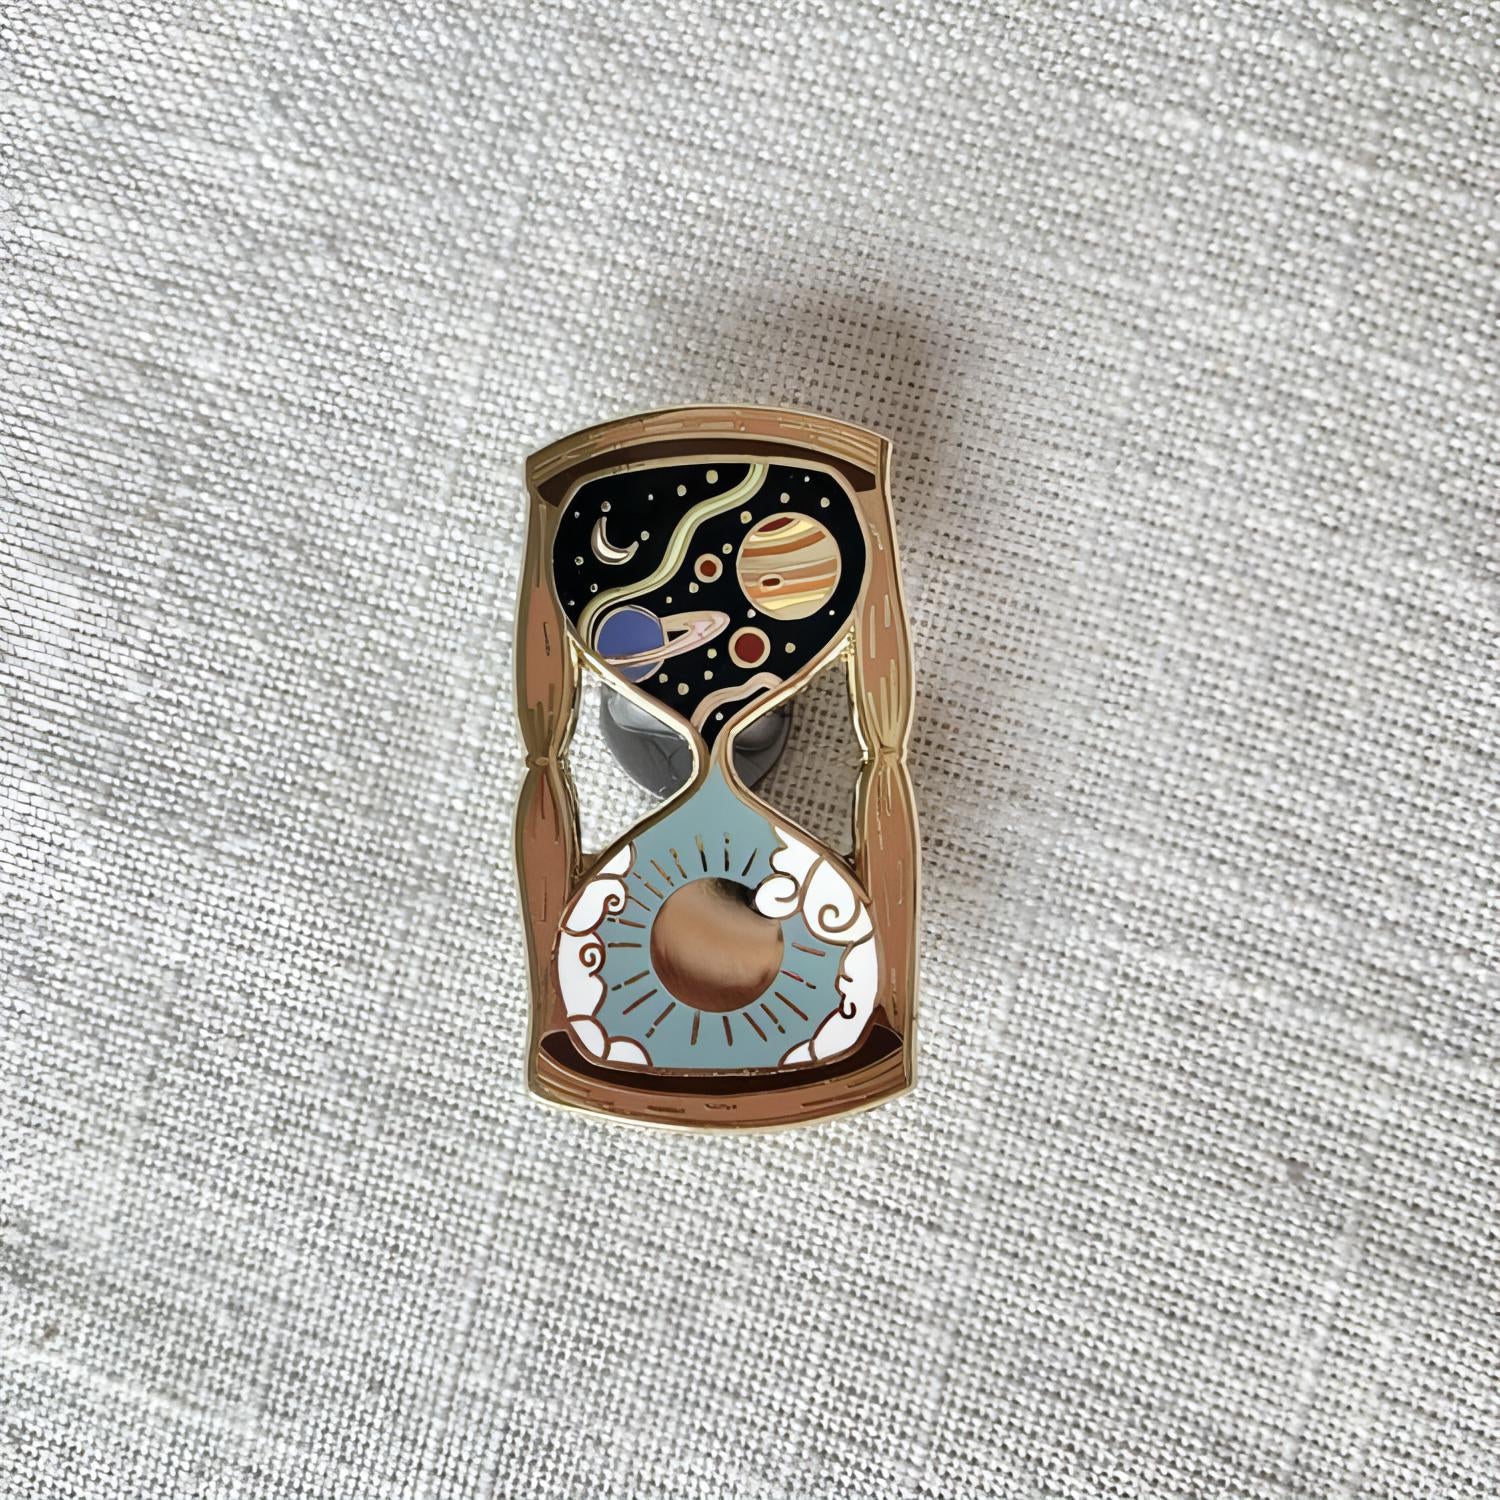 The pin pictured top-down.